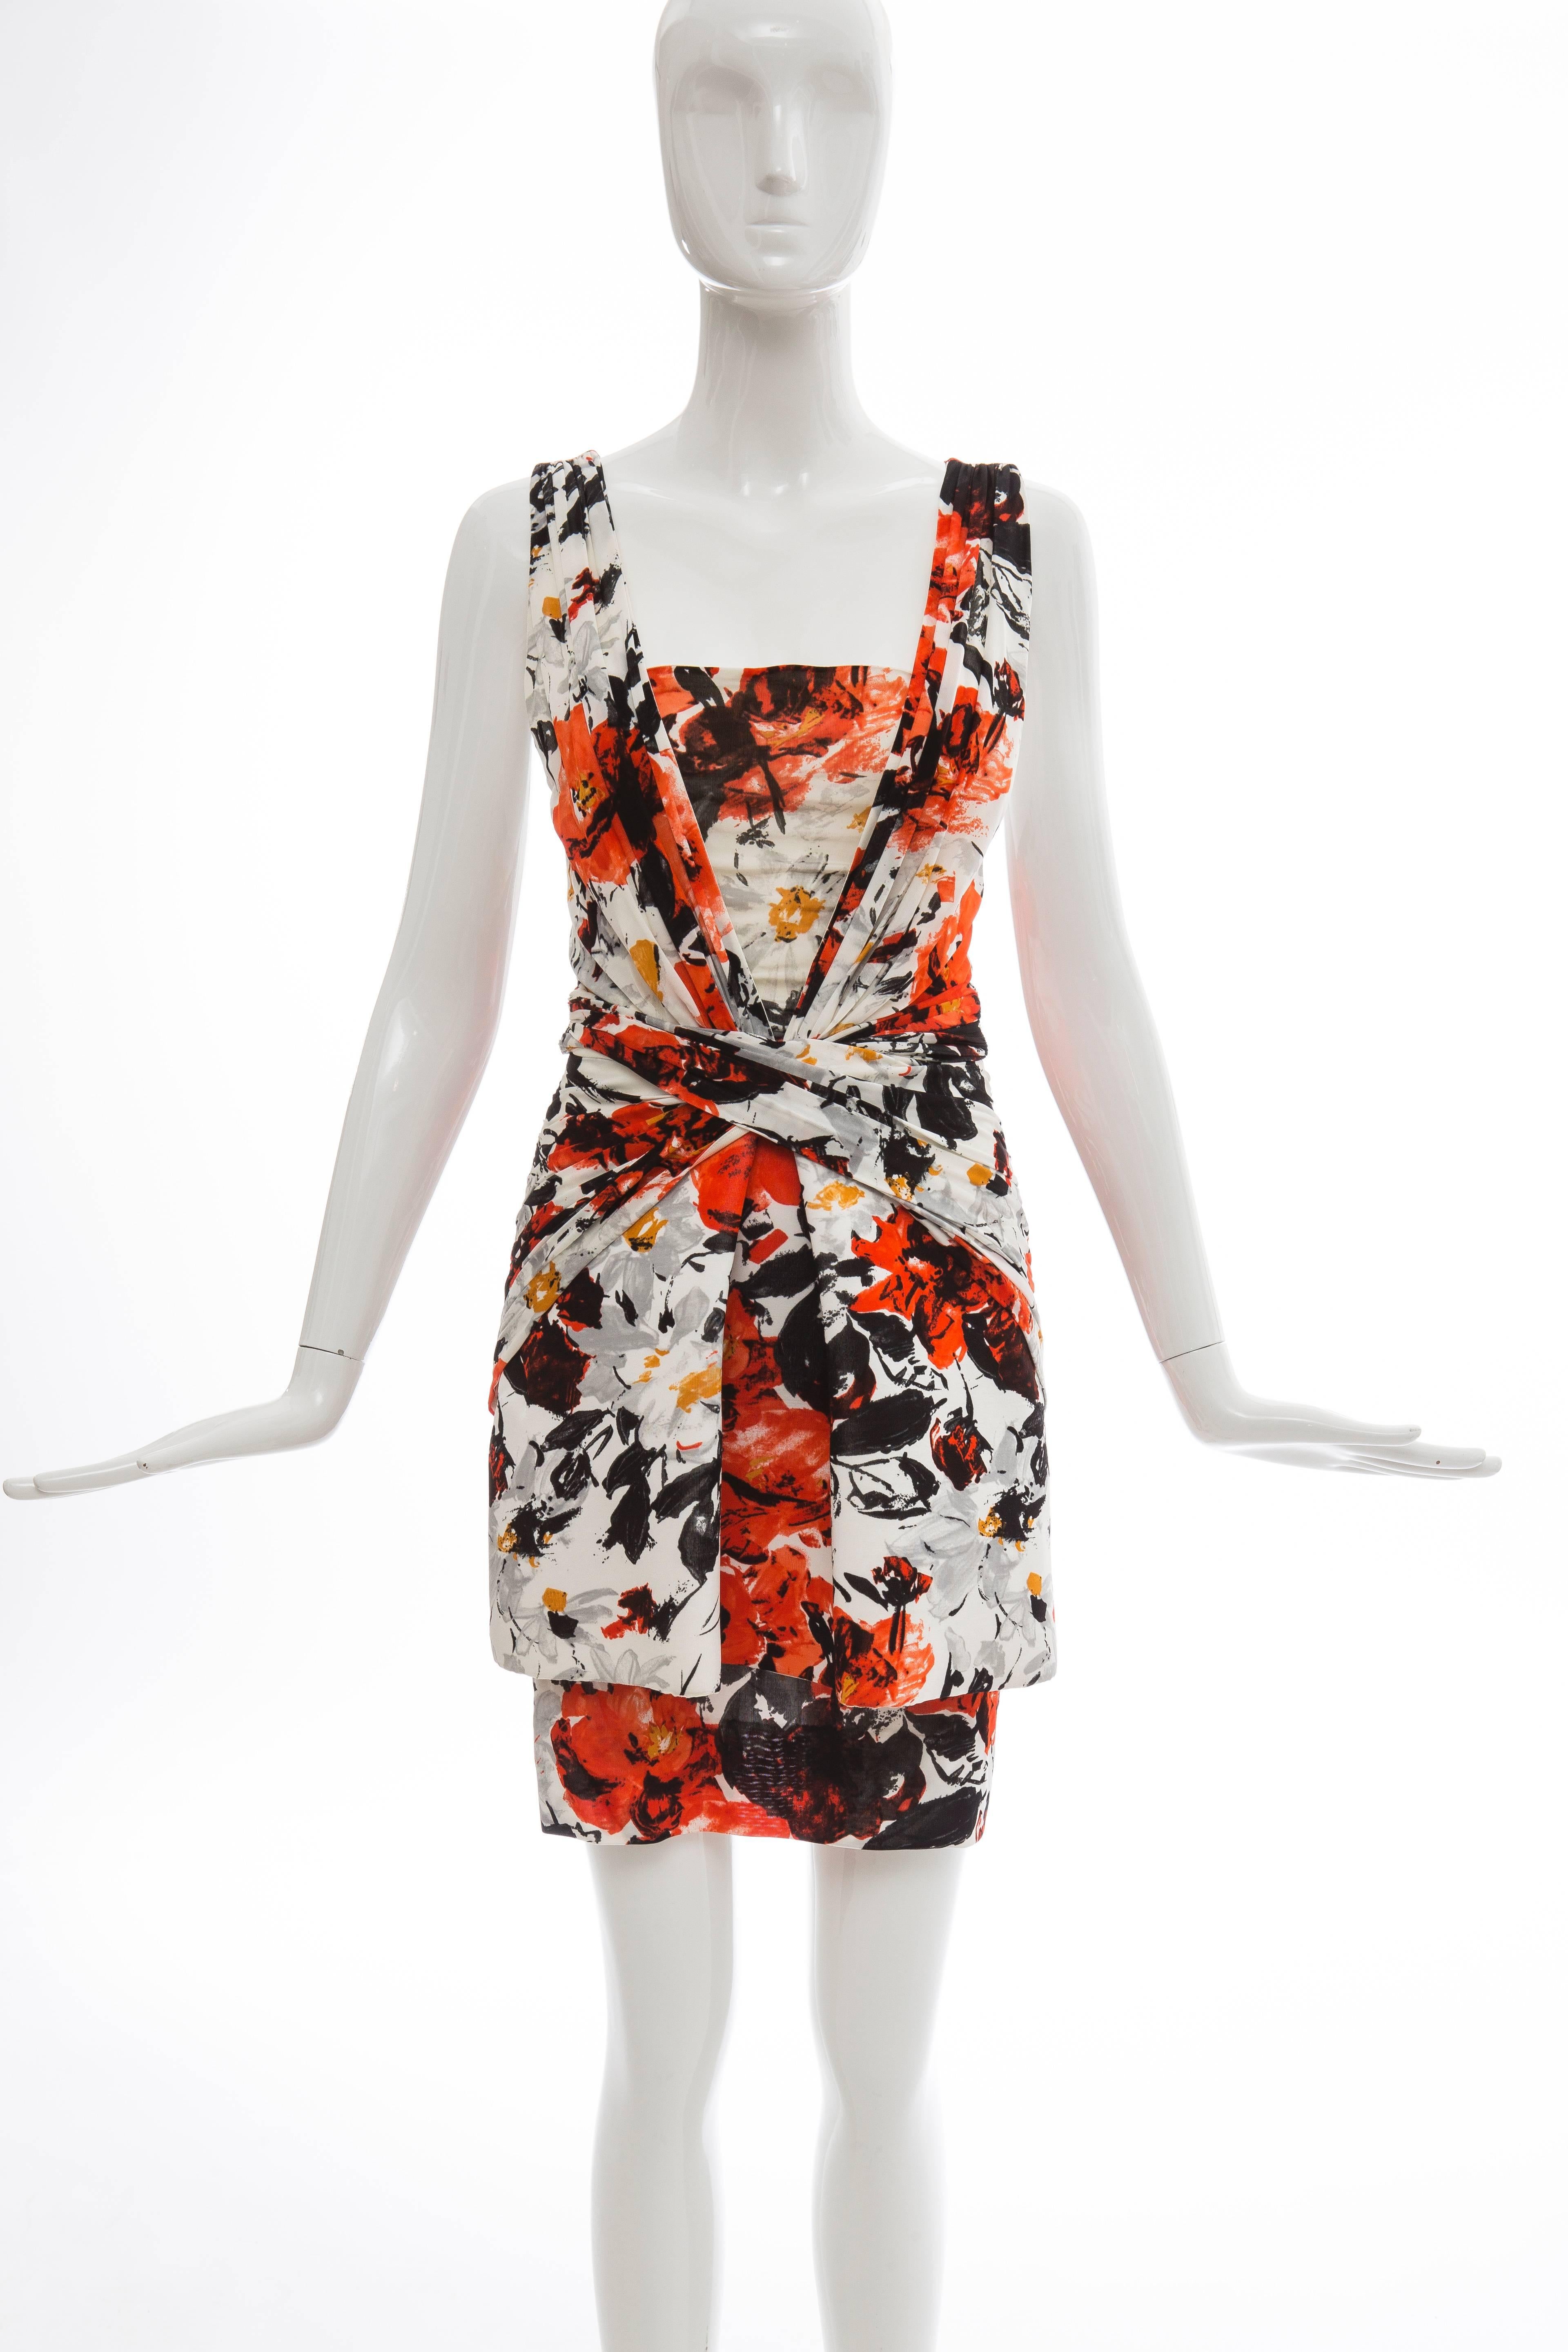 Nicolas Ghesquiere for Balenciaga, Spring-Summer 2008, sleeveless floral dress, with pleated neoprene overlay at skirt, draping throughout, interior boning and invisible back zip closure.

FR. 36
US. 4

Bust: 32